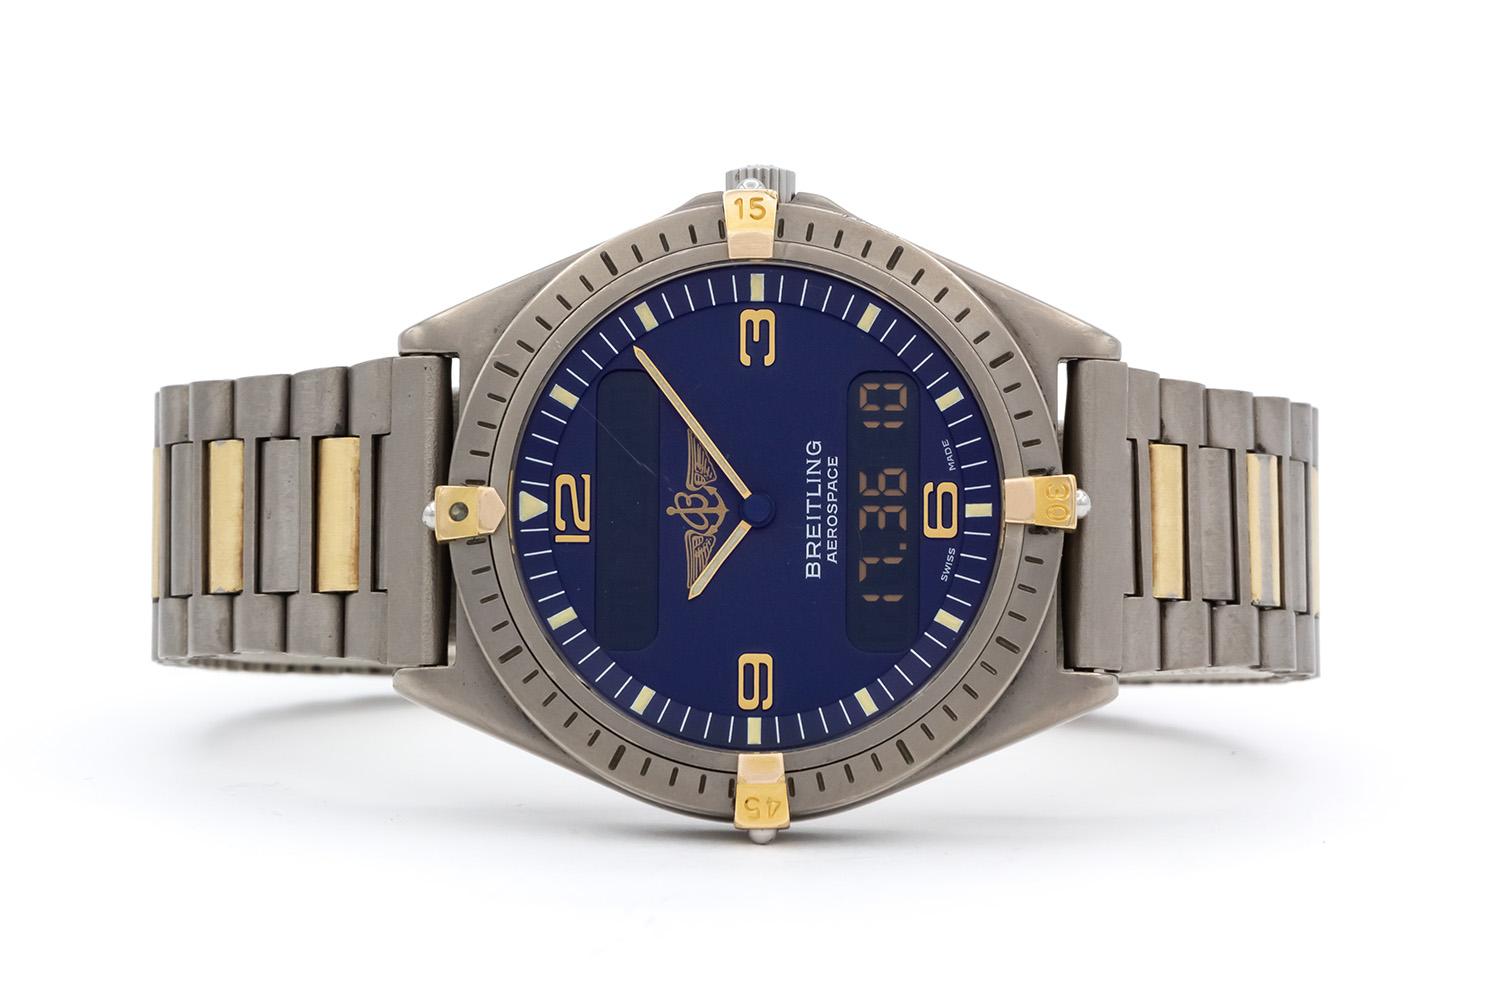 We are pleased to offer this Breitling Titanium & Gold Plated Two Tone Aerospace Watch F56059. This watch features a 40mm titanium case, two tone titanium & gold plated bracelet and Swiss quartz movement with analog and digital display. It will fit